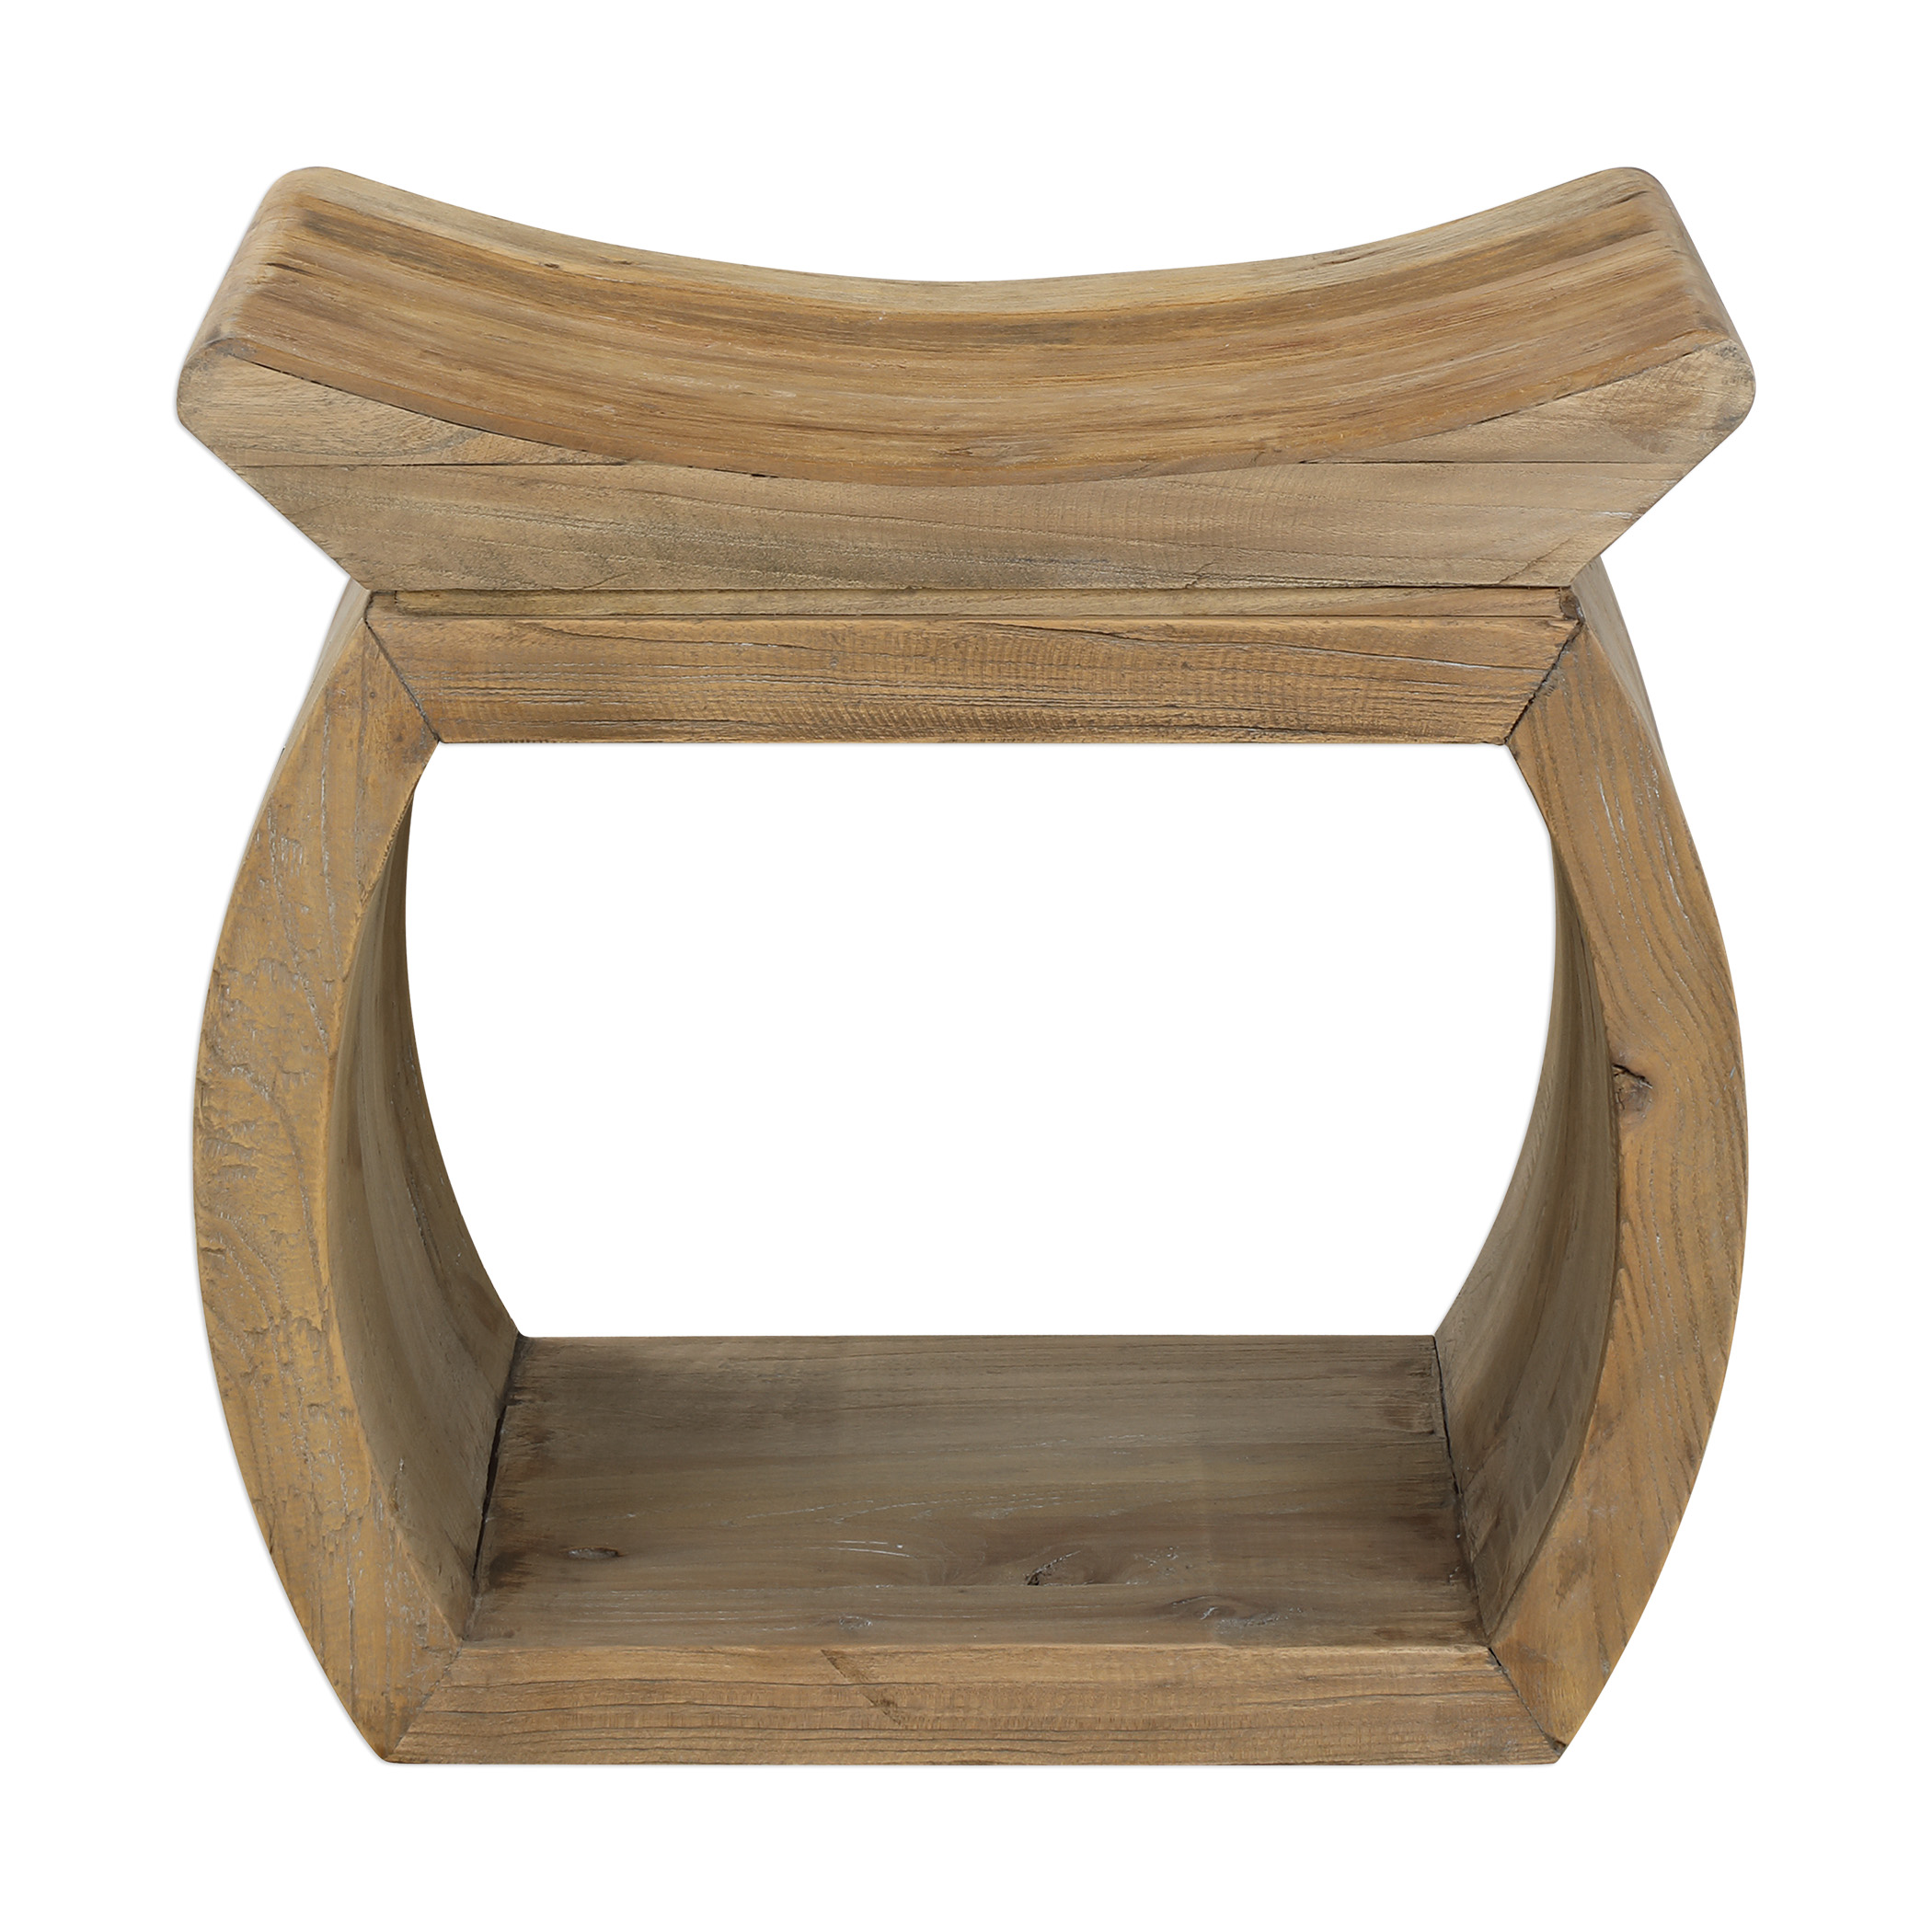 Online Designer Combined Living/Dining Connor Elm Accent Stool